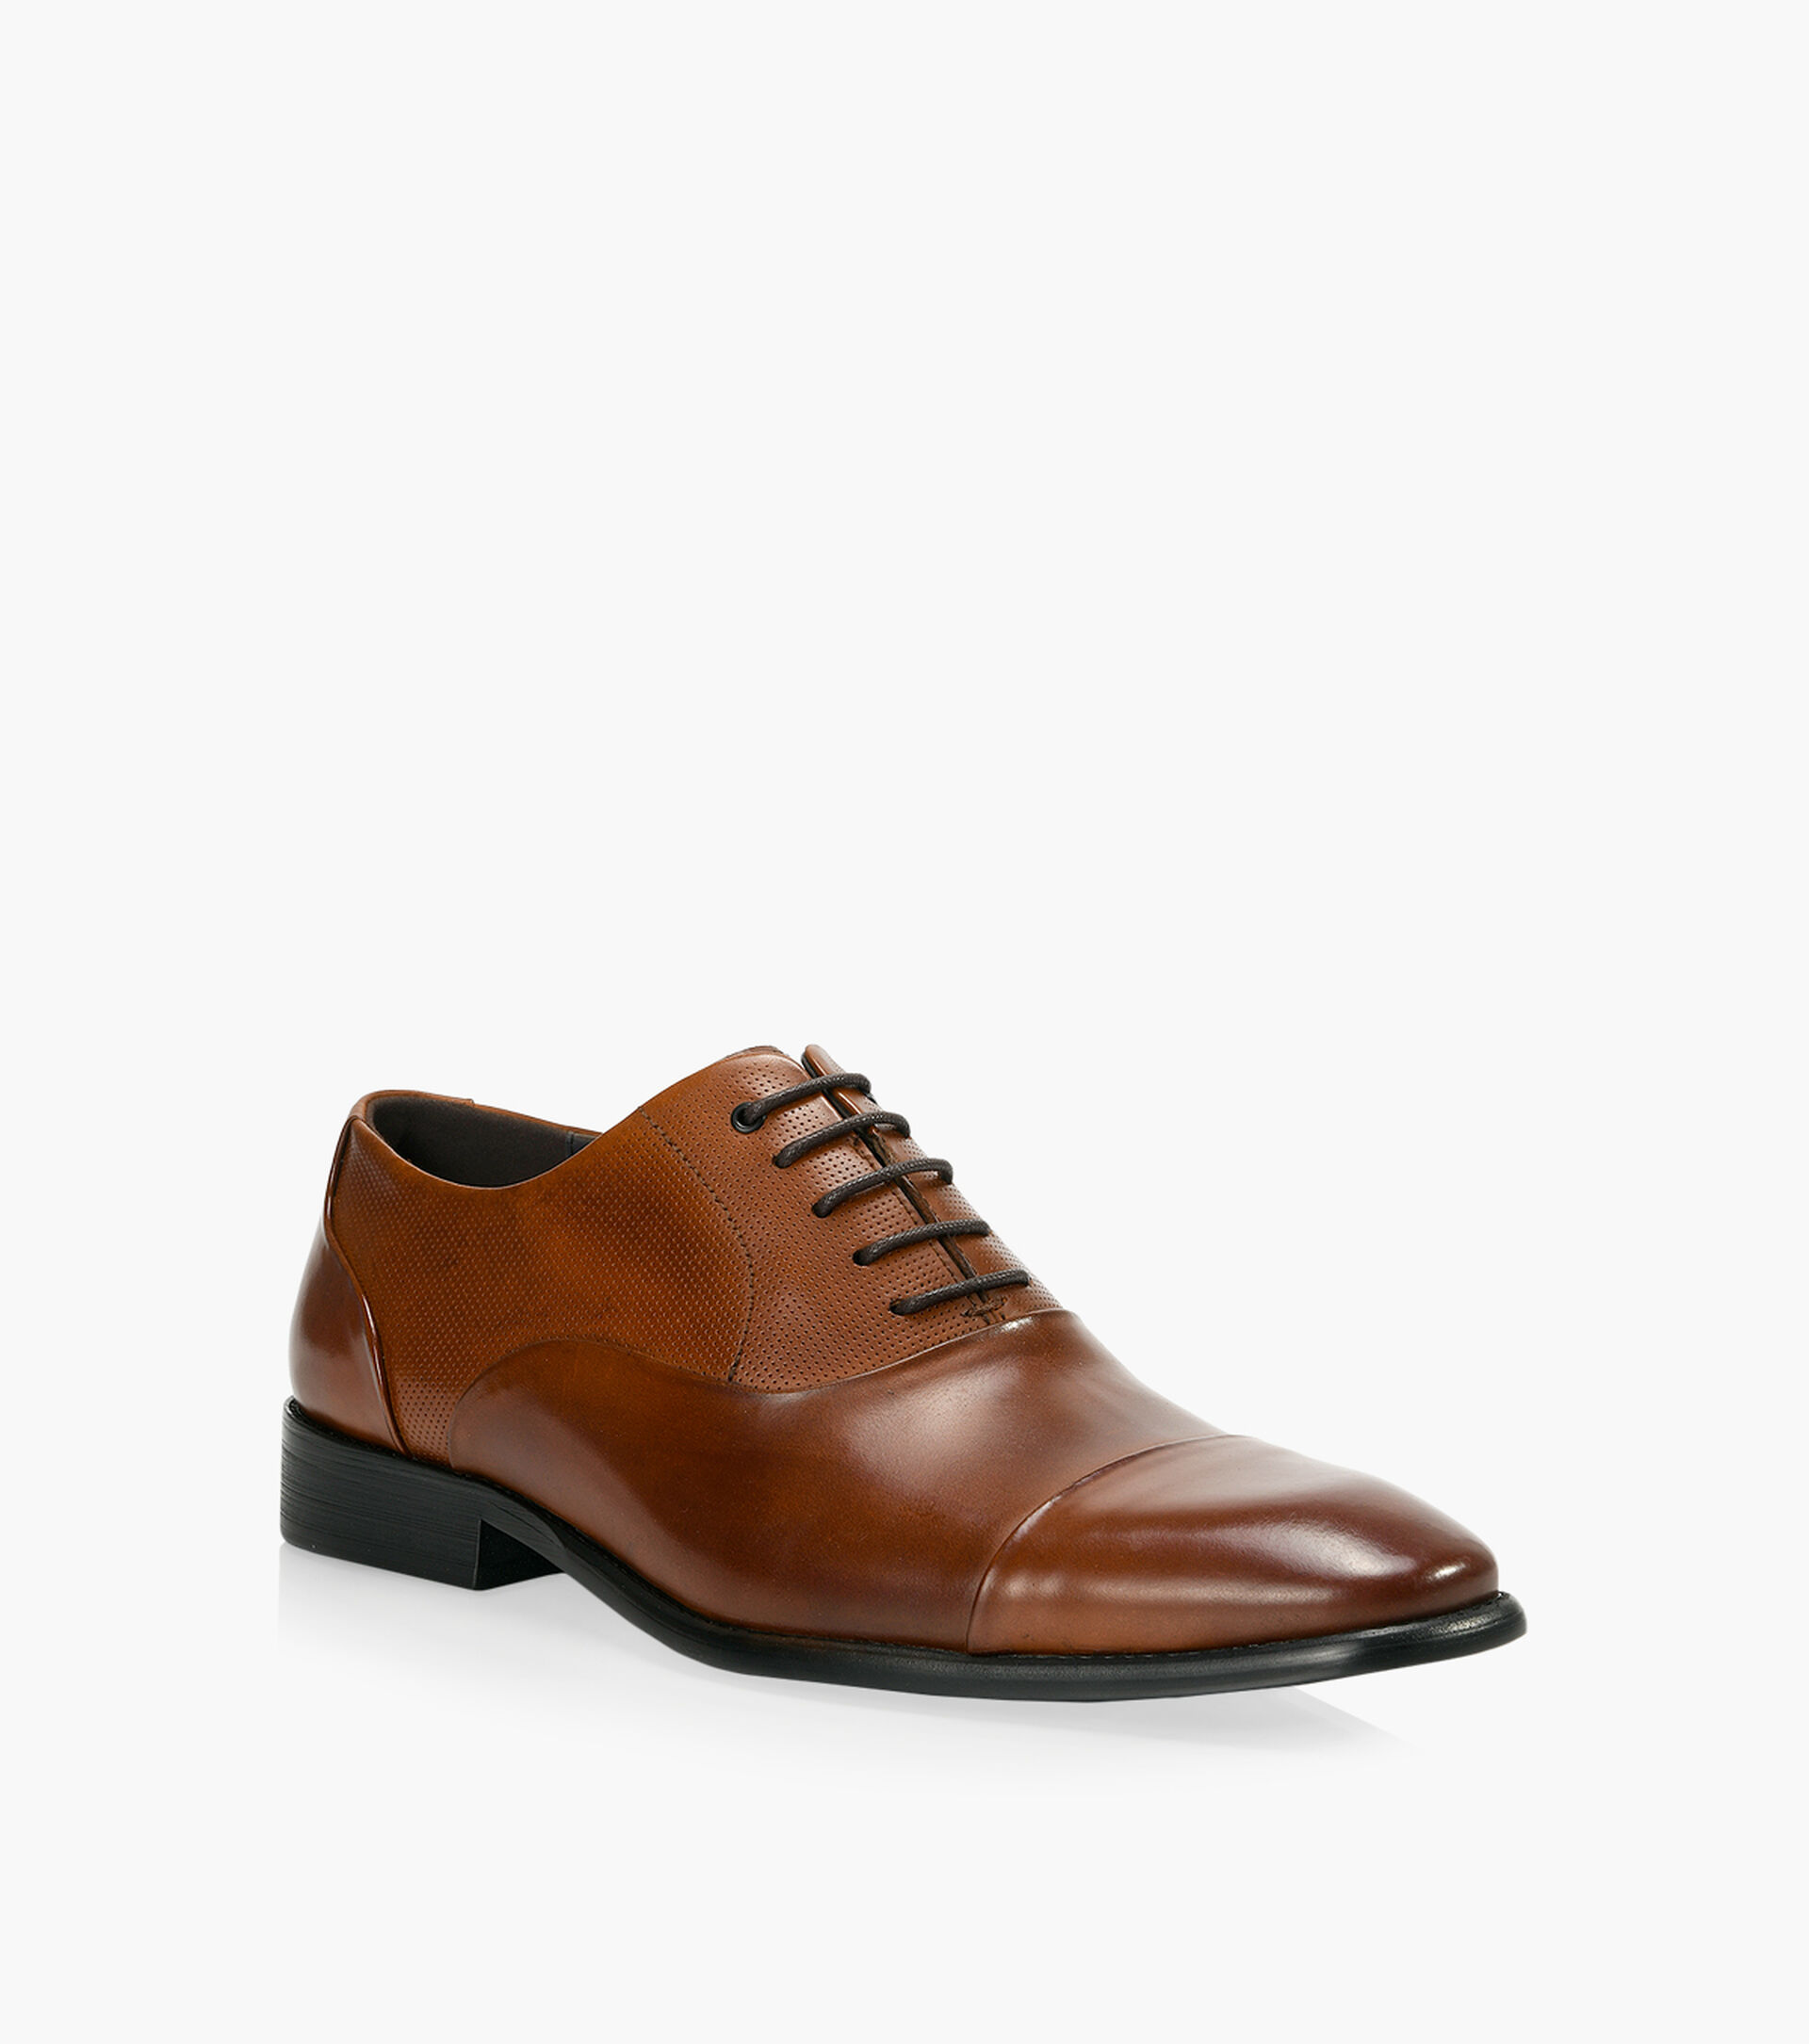 BROWNS BROSS - Leather | Browns Shoes